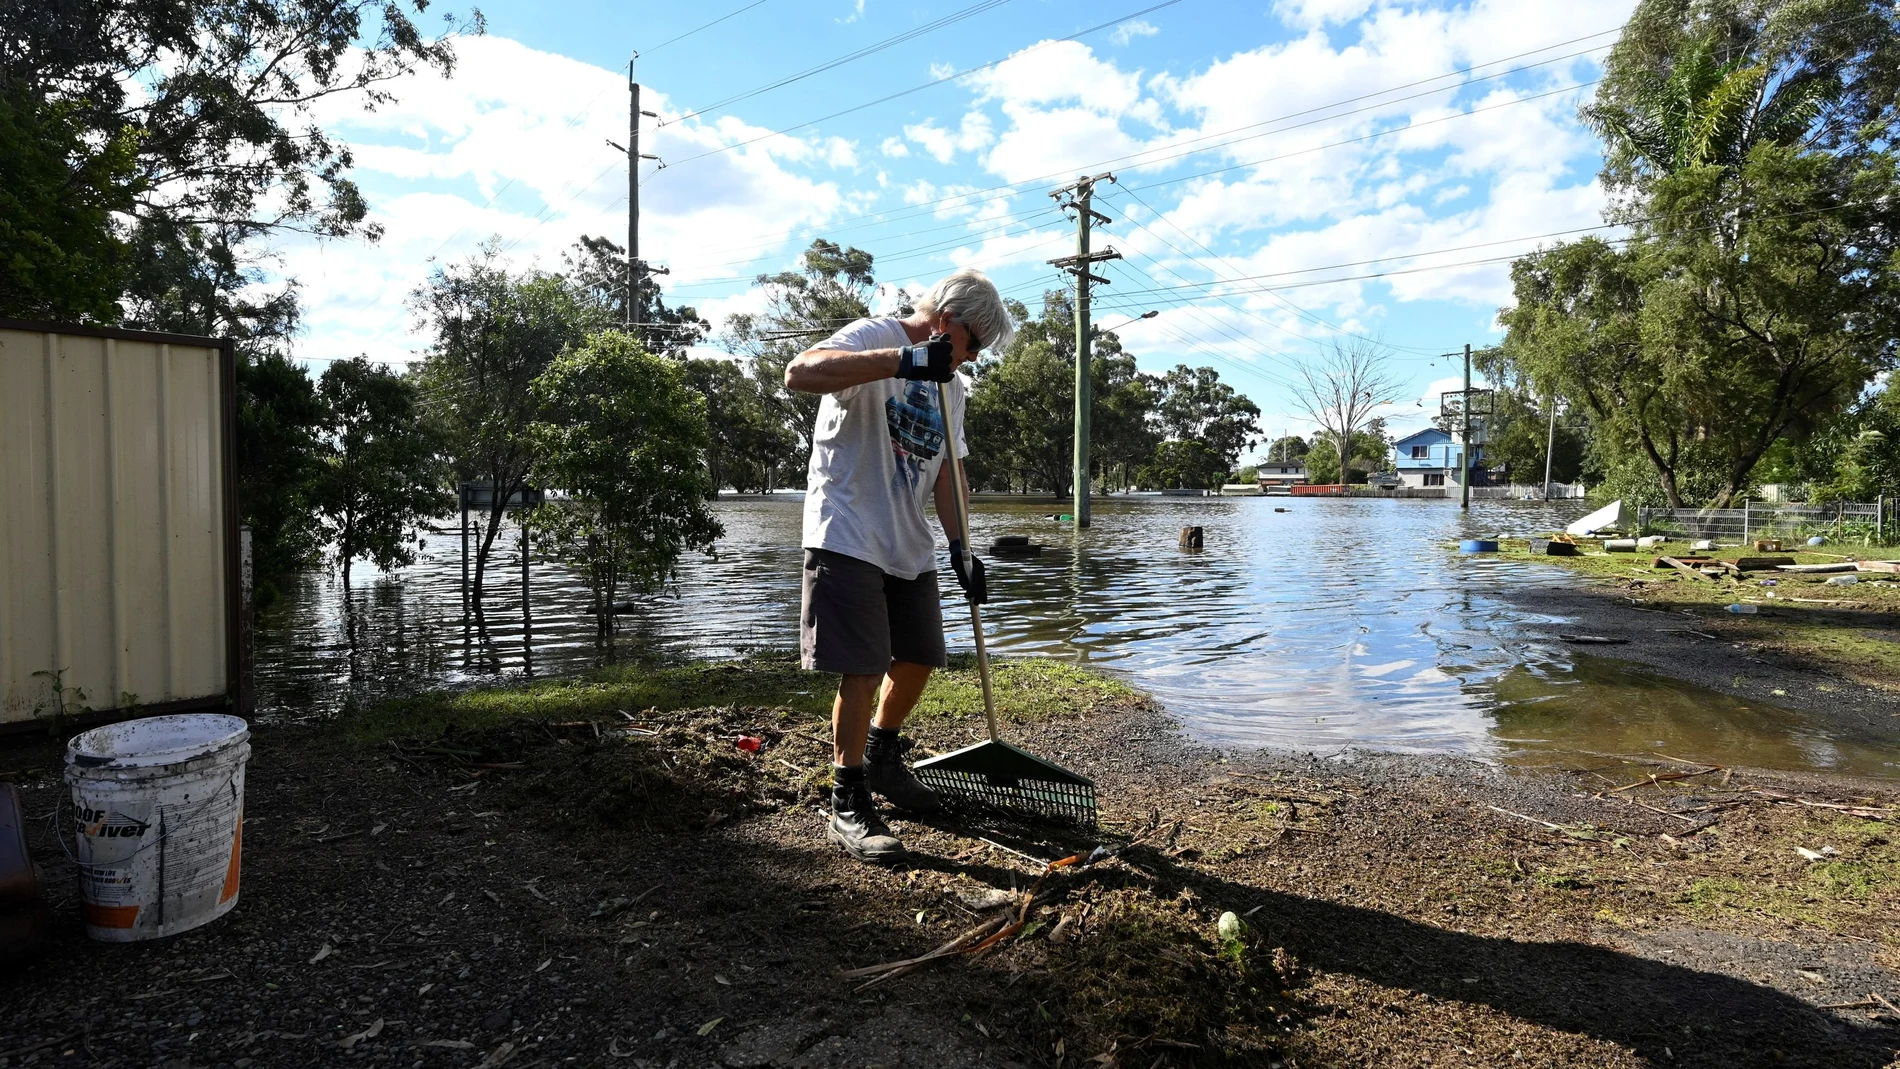 A man cleans up debris in front of his house in the suburb of Windsor as the state of New South Wales experiences widespread flooding and severe weather, near Sydney, Australia, March 24, 2021. REUTERS/Jaimi Joy